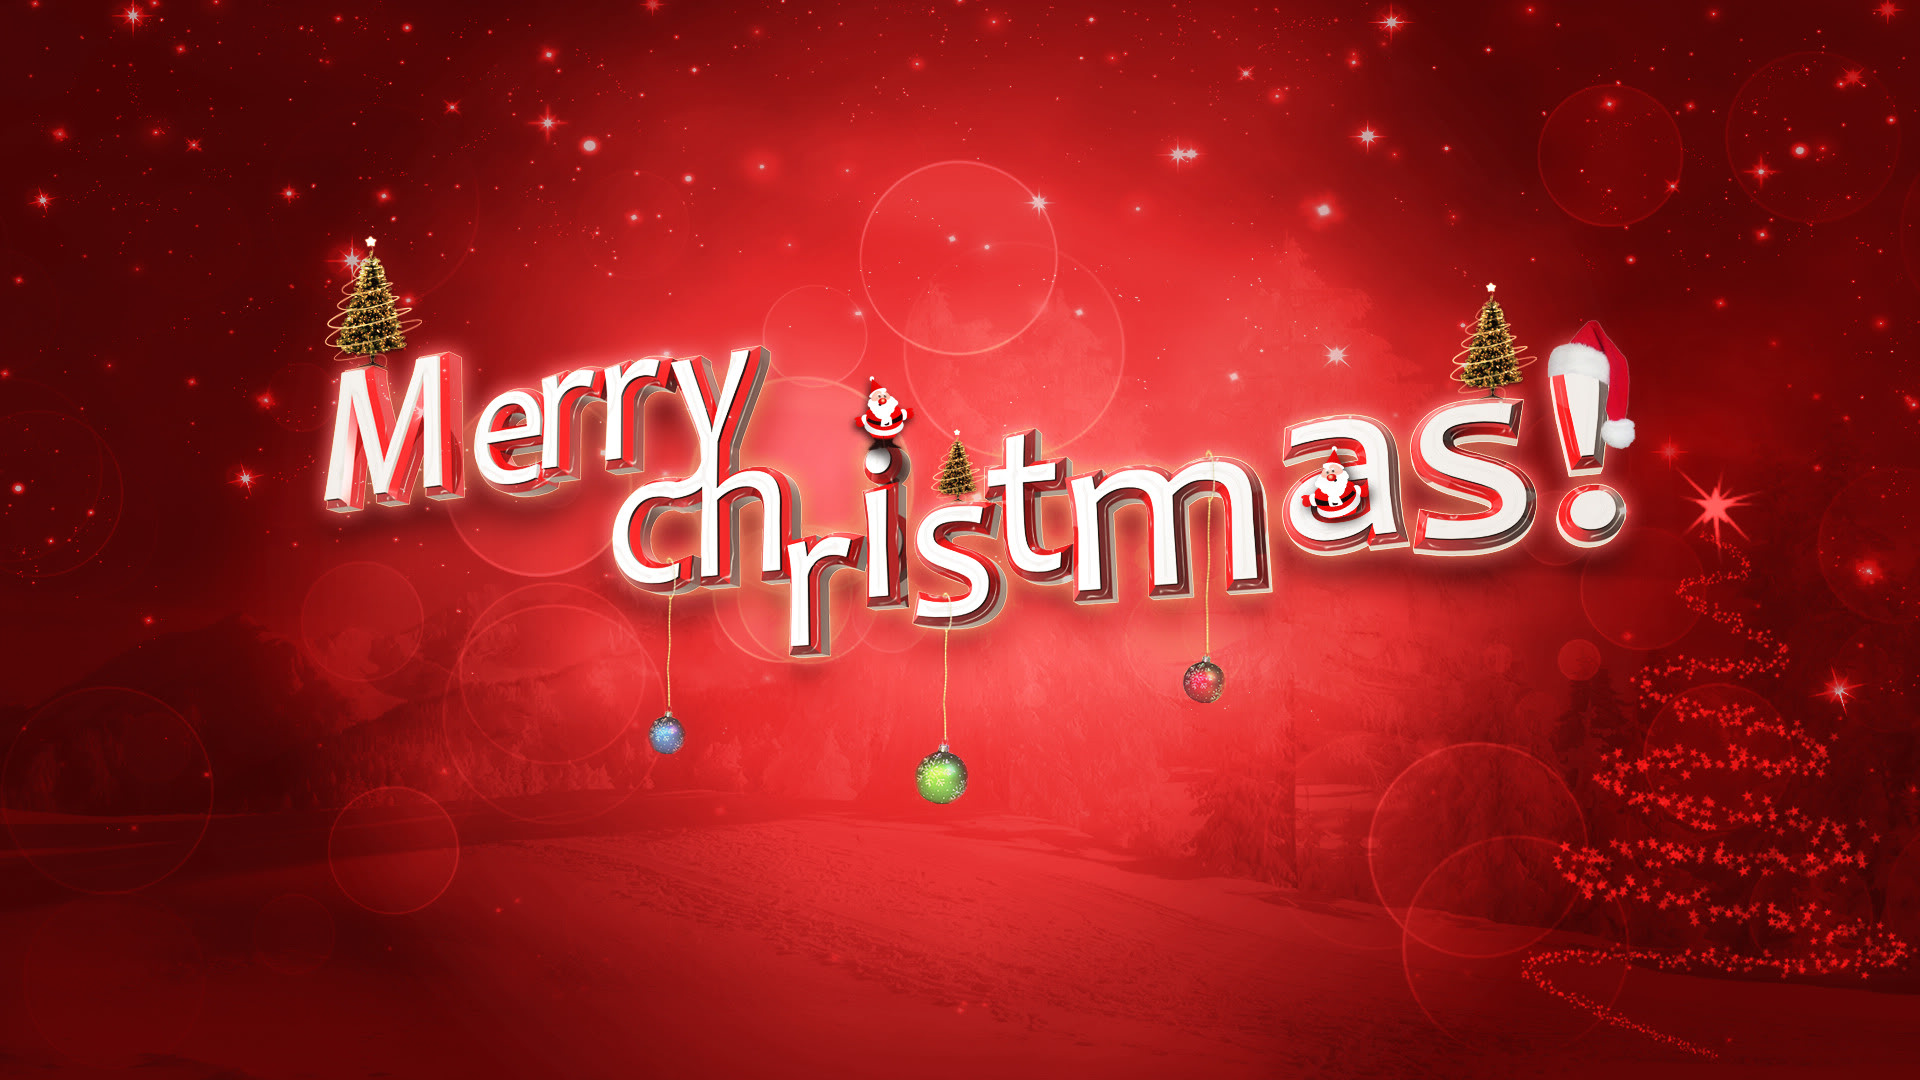 Advance Merry Christmas 2016 Images Pictures Whatsapp dp